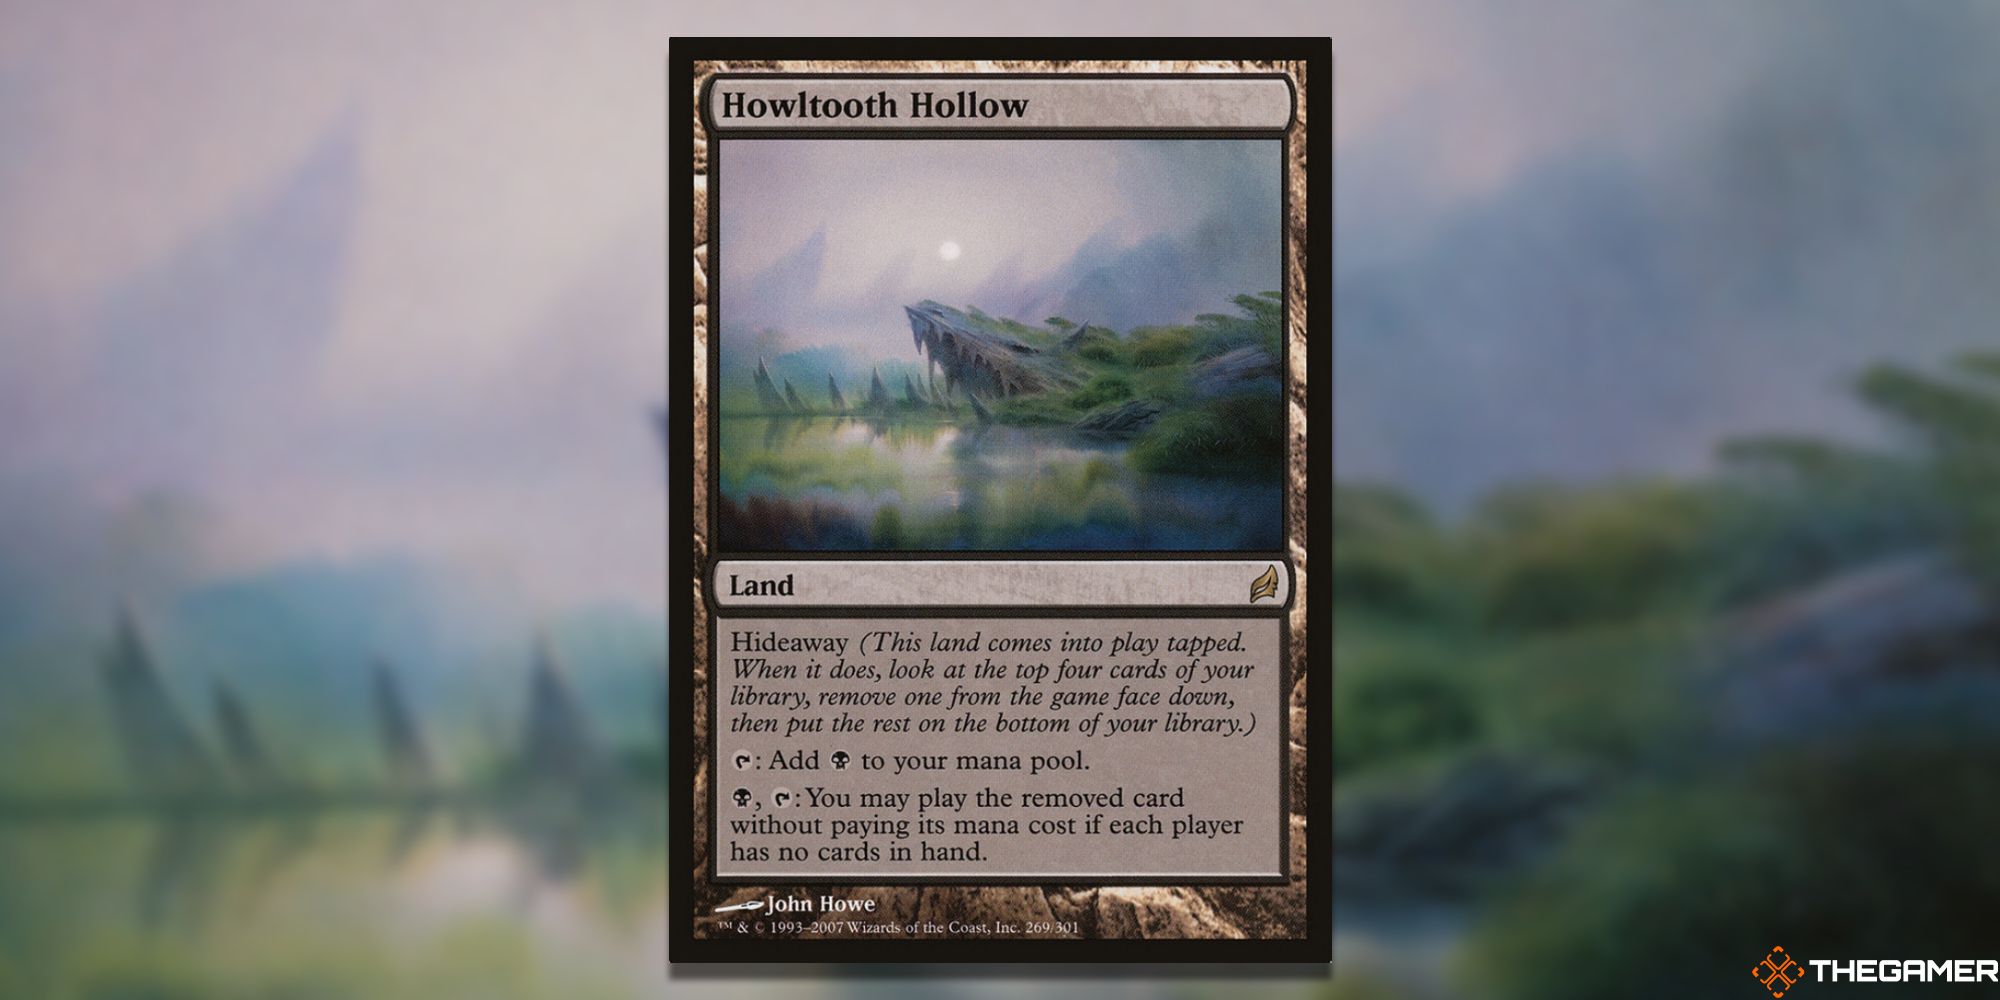 Howltooth Hollow card art with background